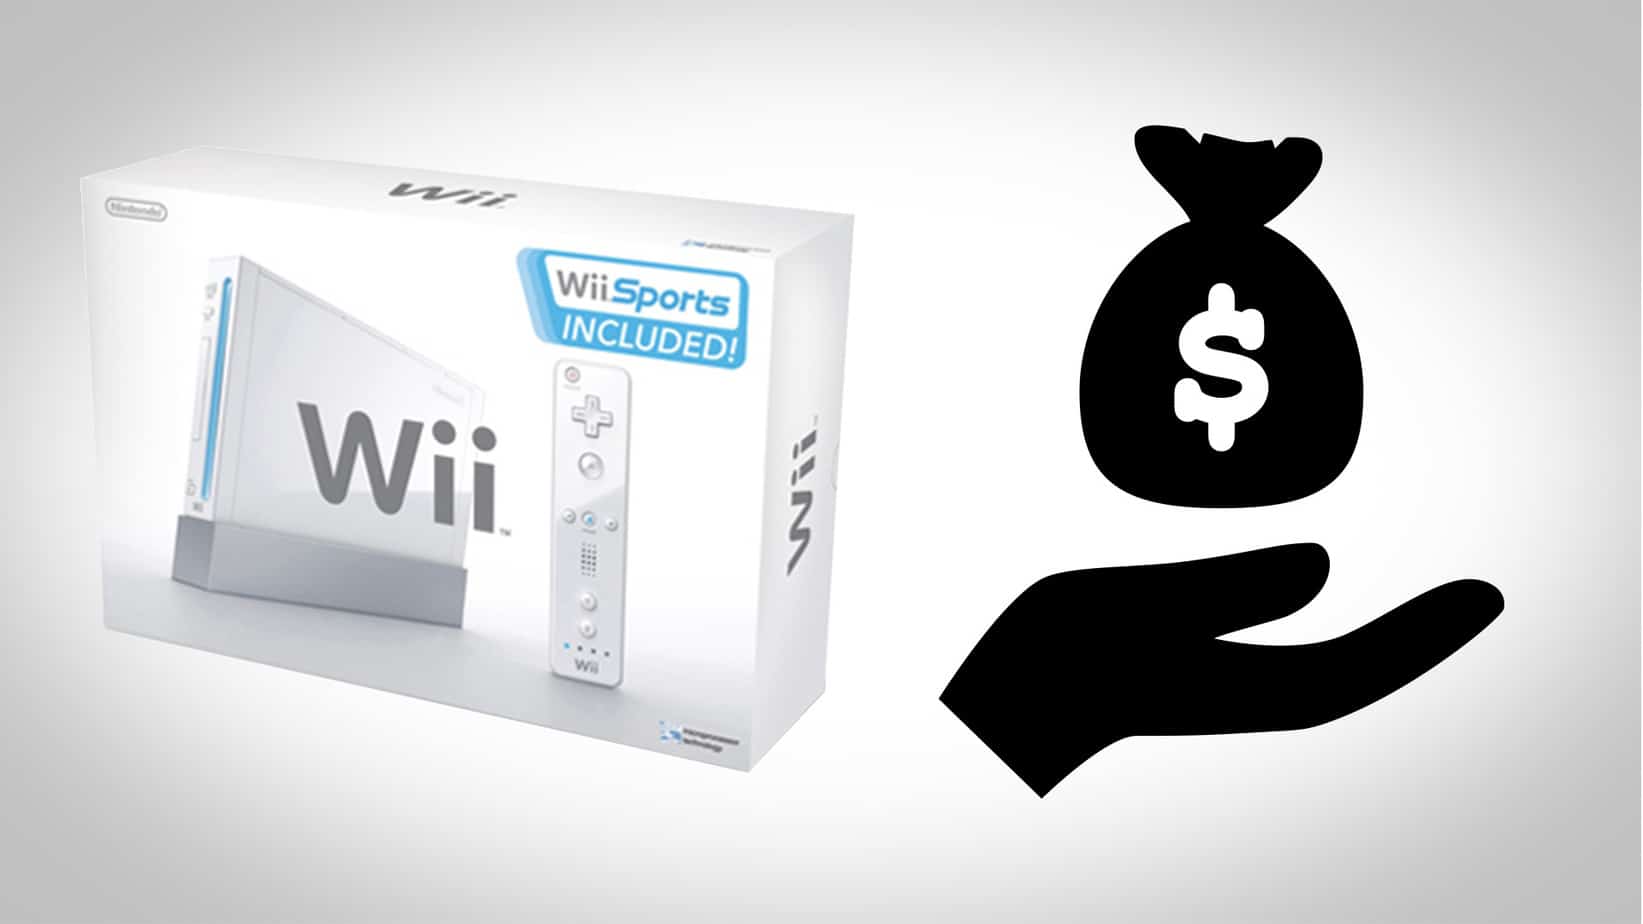 How Much Is A Wii Worth In 2023?